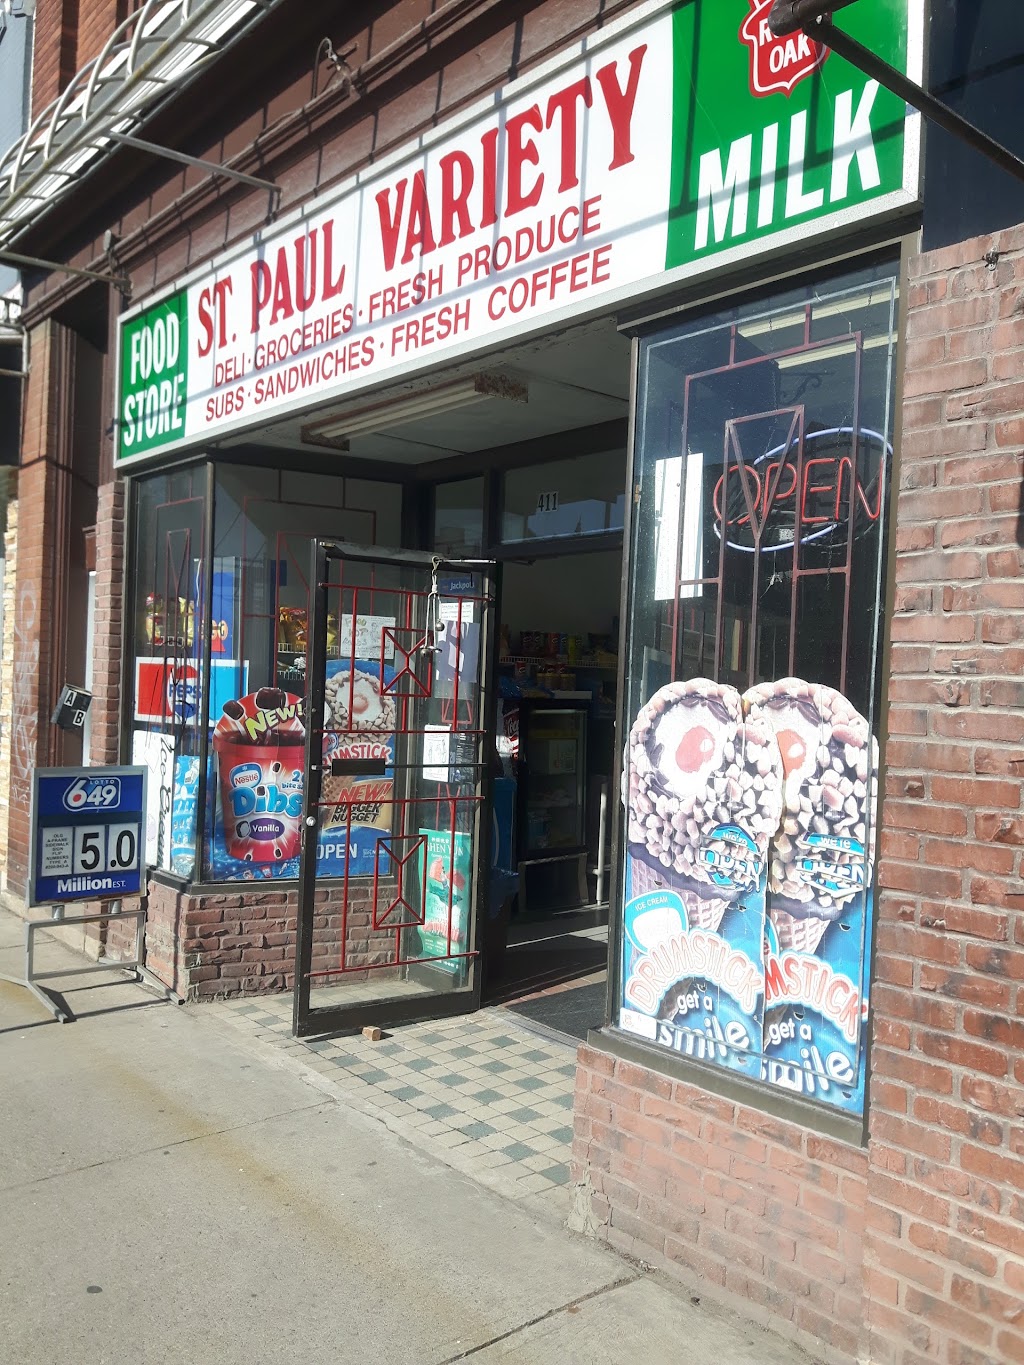 St Paul Variety & Grocery | 411 St Paul St, St. Catharines, ON L2R 3N1, Canada | Phone: (905) 685-8242